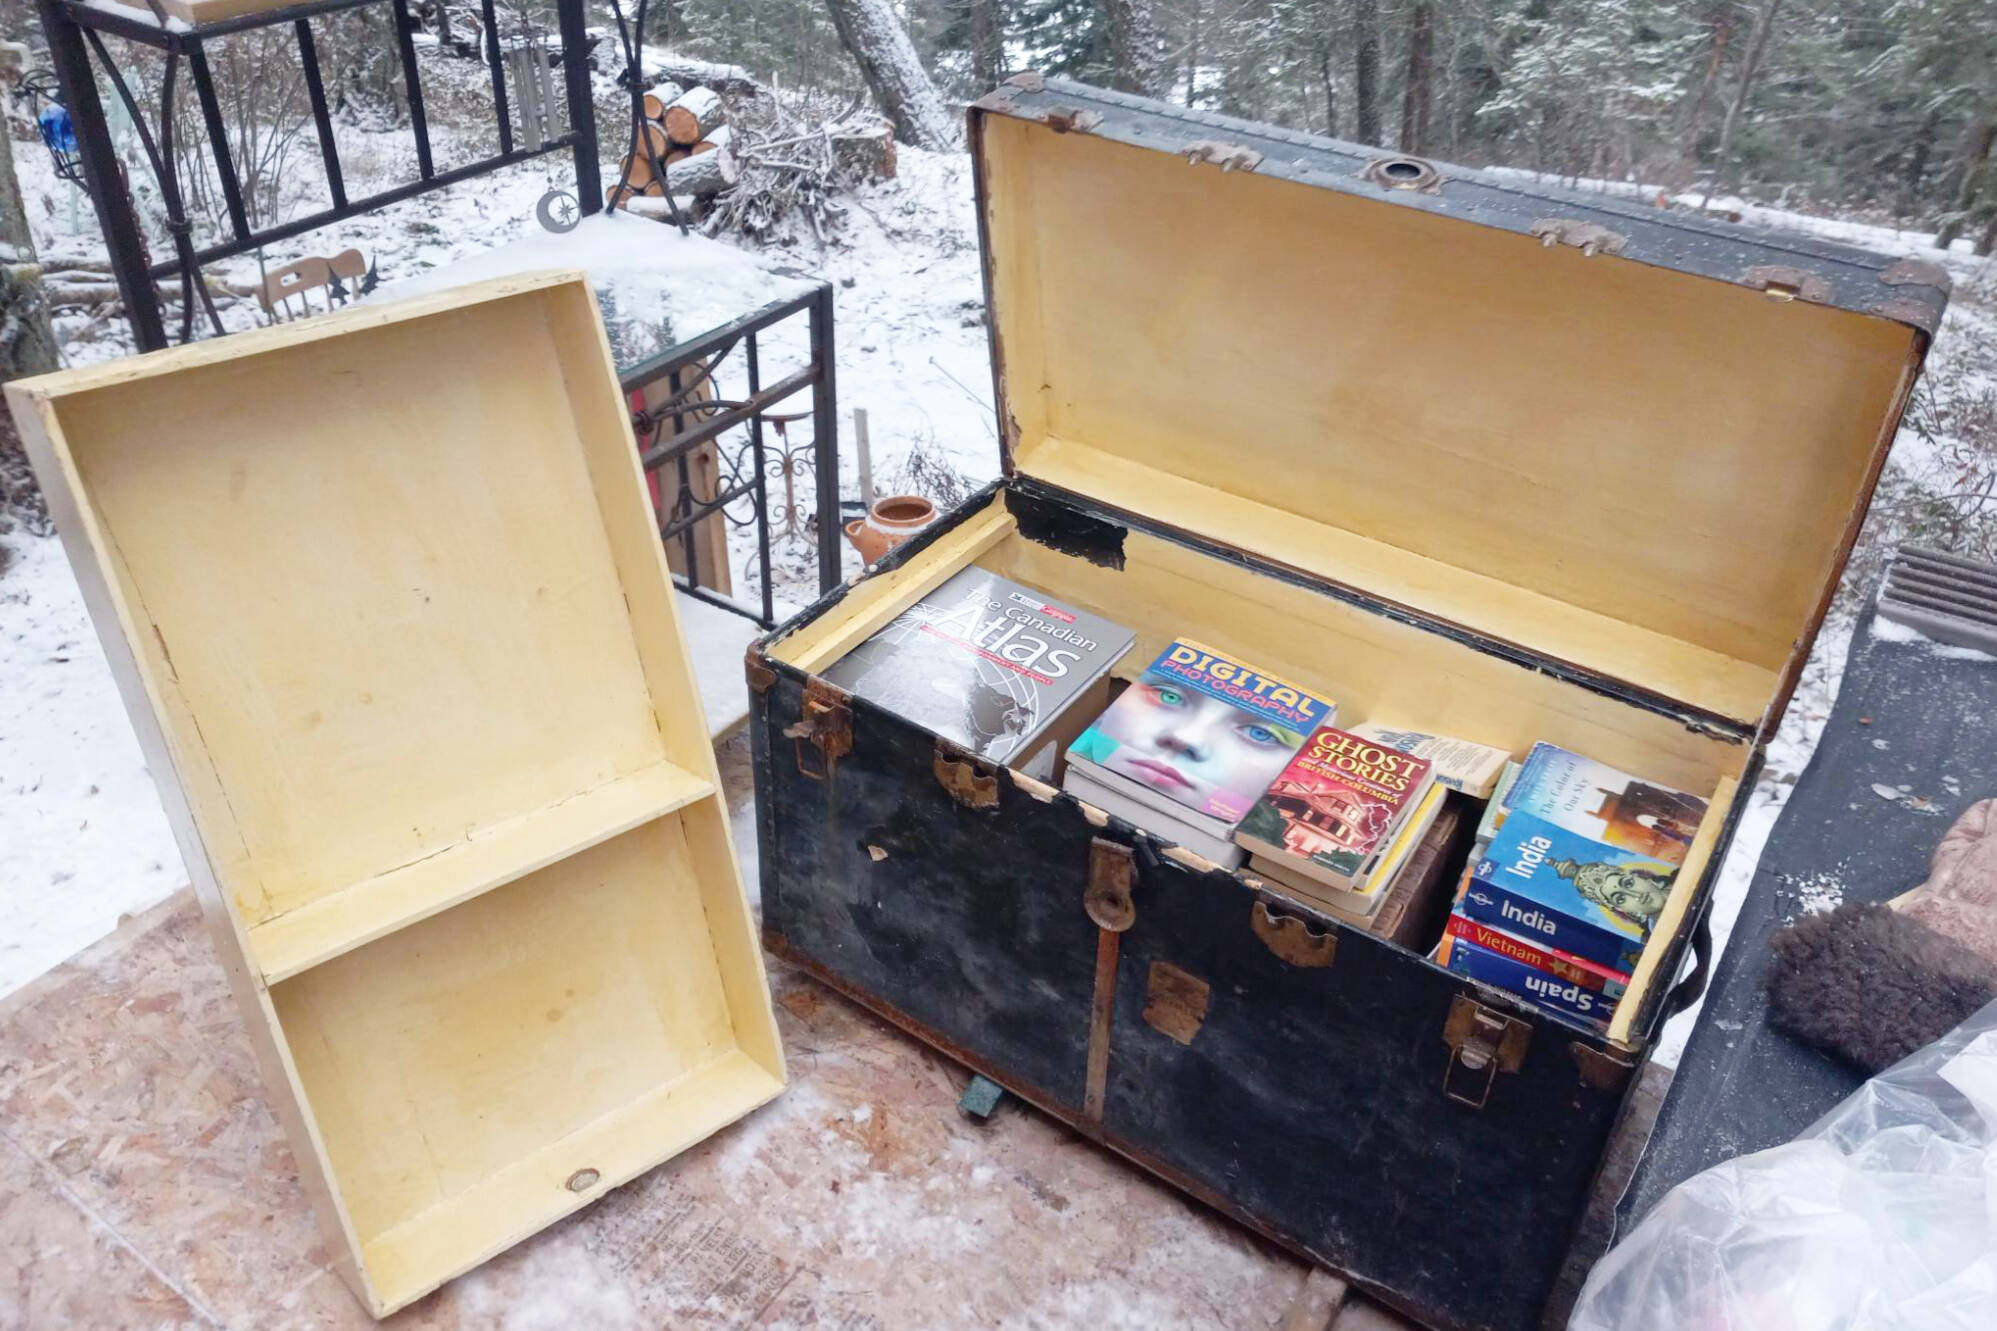 Pilinka Wiseman has furnished almost her entire trailer and outdoor area where she lives with things she has taken from the Share Shack at the Scotch Creek Refuse Transfer Station, including a trunk full of books and shelving. (Pilinka Wiseman photo)